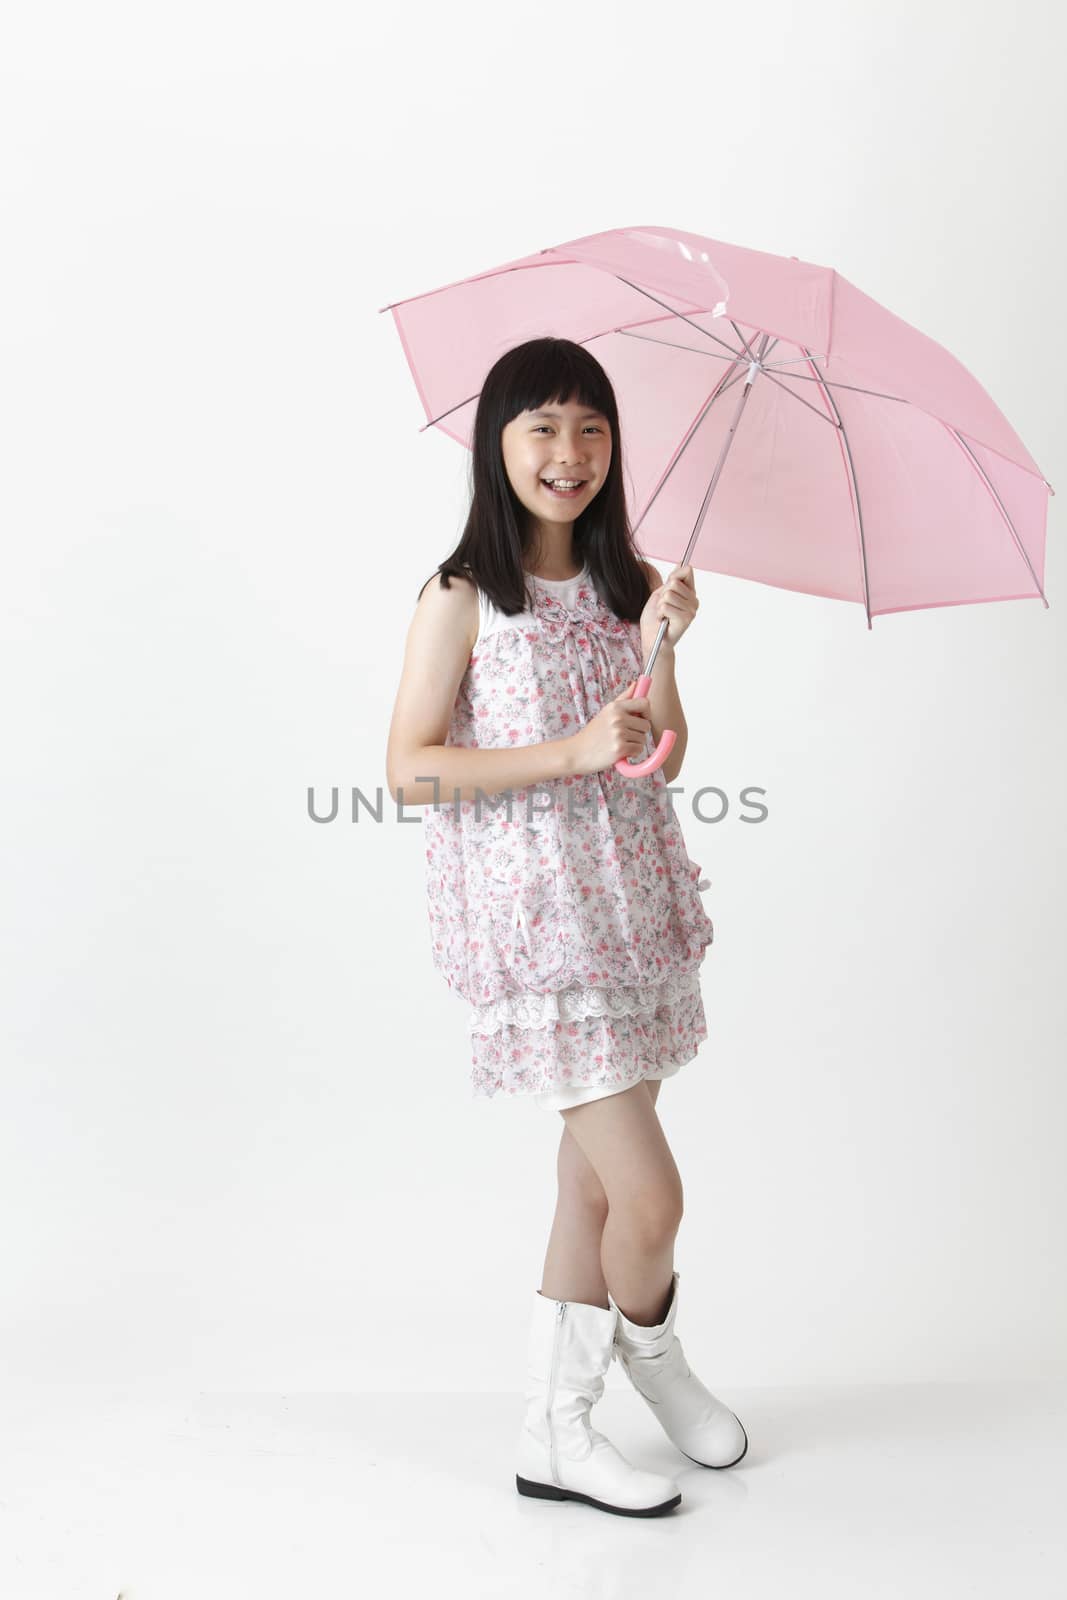 chinese girl holding a pink umbrella